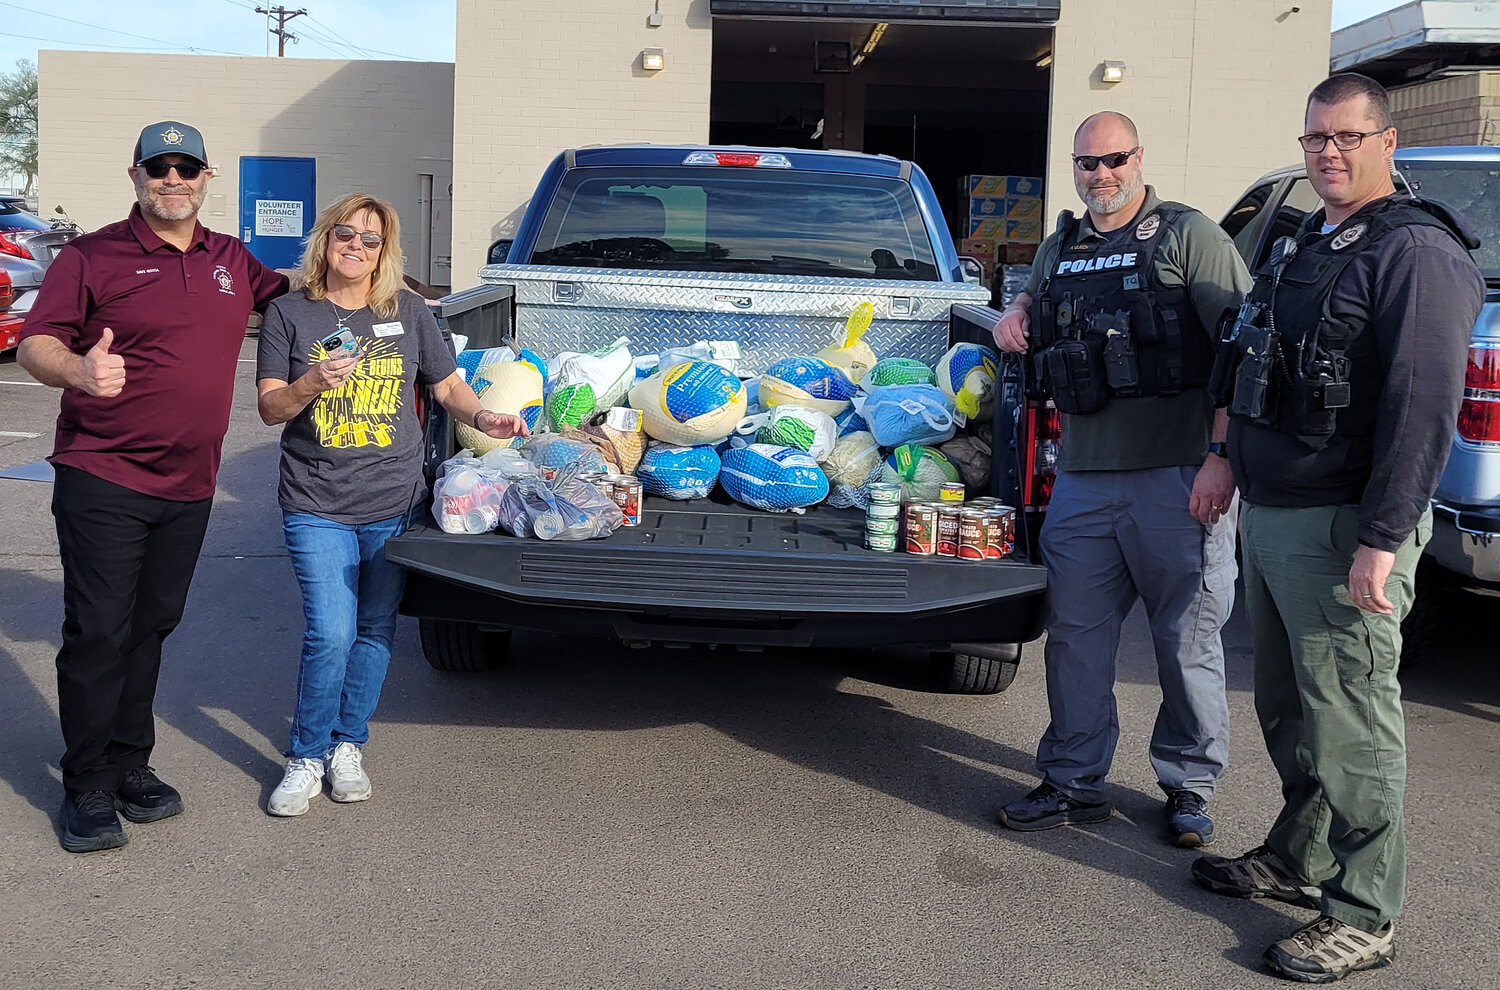 Last year’s Fraternal Order of Police, Glendale Lodge 12 frozen turkey drive (pictured) brought in almost 300 frozen turkeys to Hope For Hunger Food Bank in Glendale